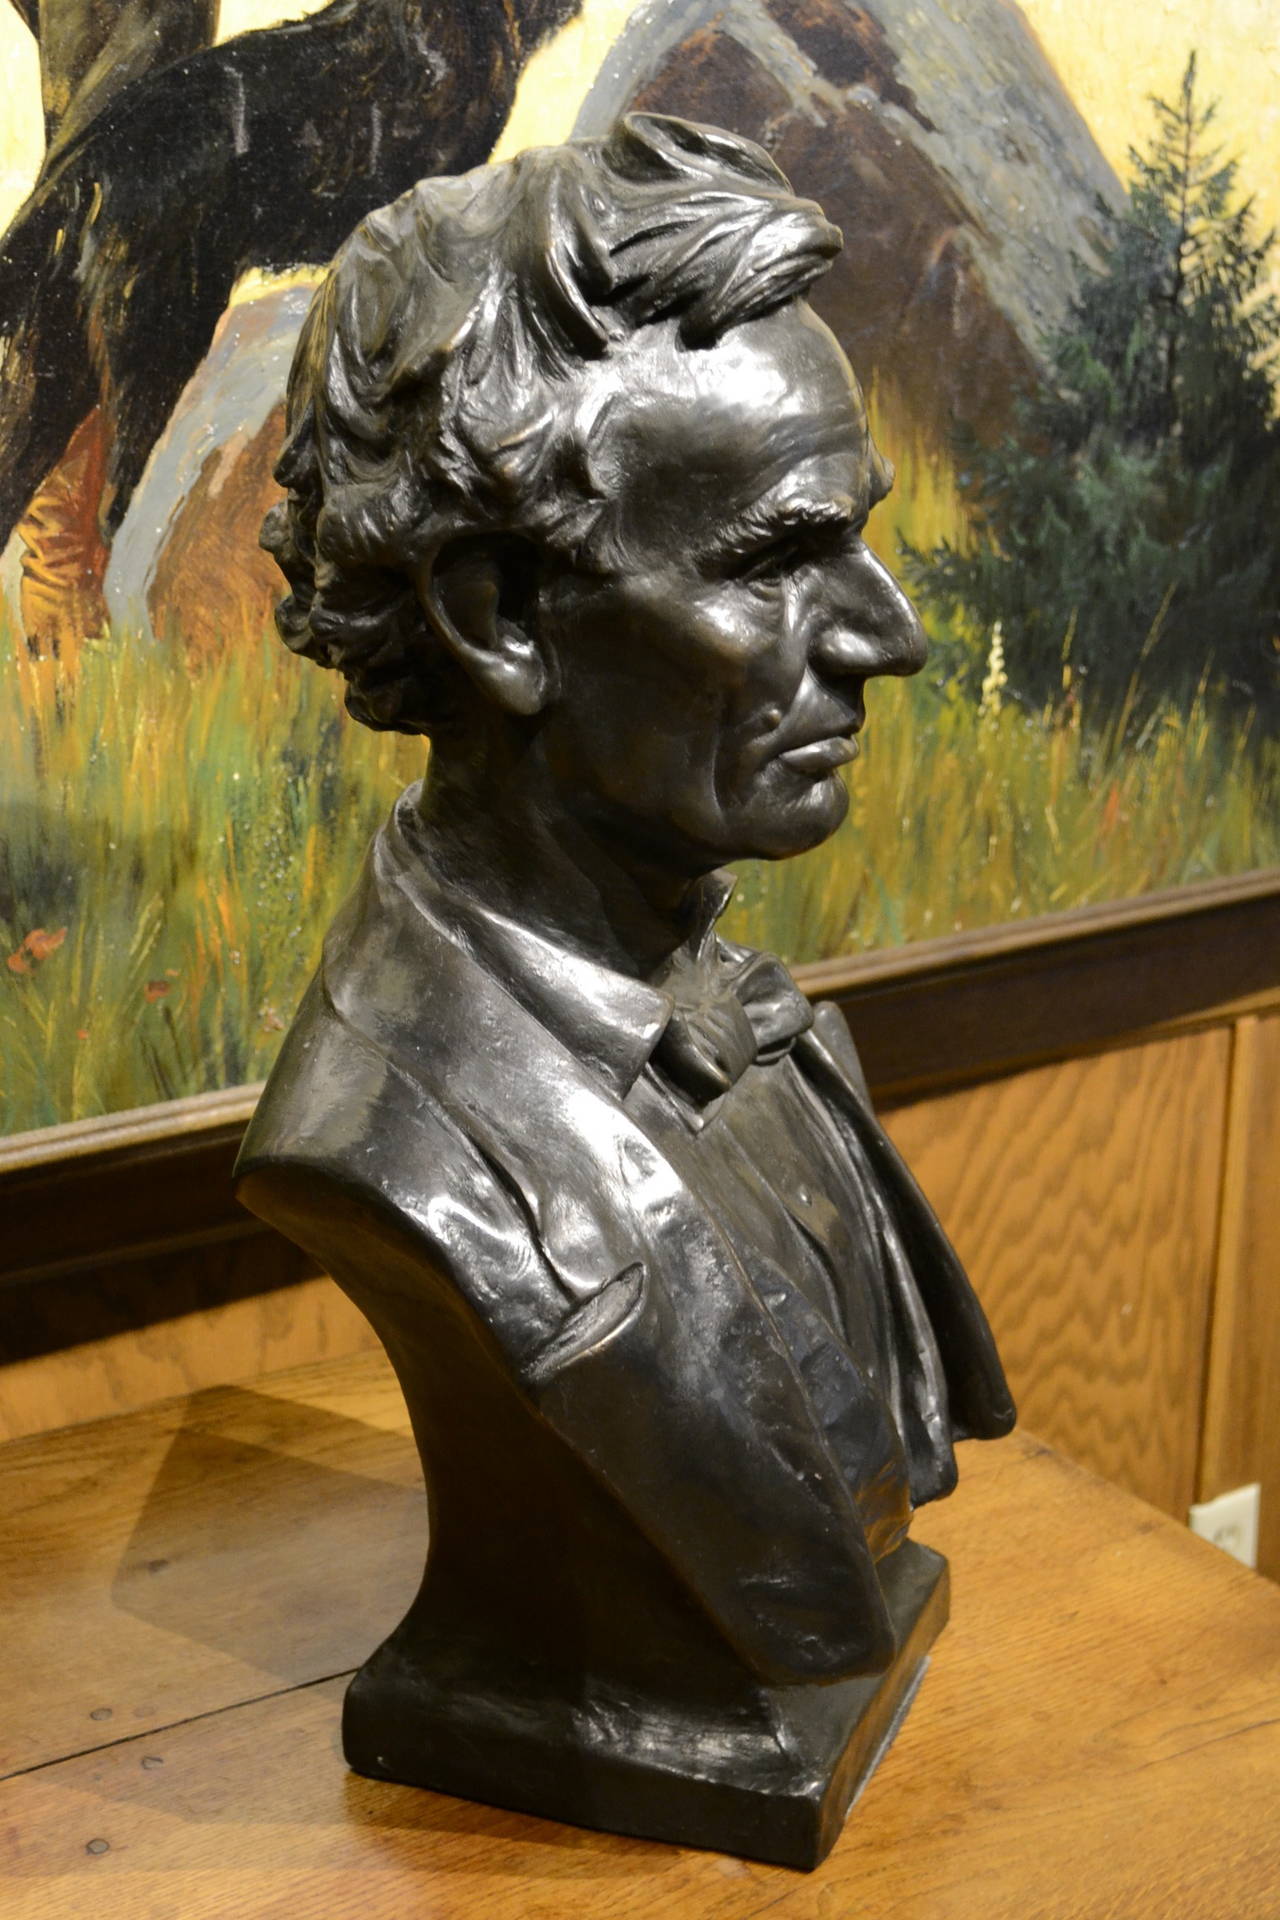 Contemporary cast in bronze from the original plaster cast, this bust of a beardless President Lincoln is similar to other works by Bachman (1862 - 1921), which are found in the Smithsonian used for several public monuments dedicated to the